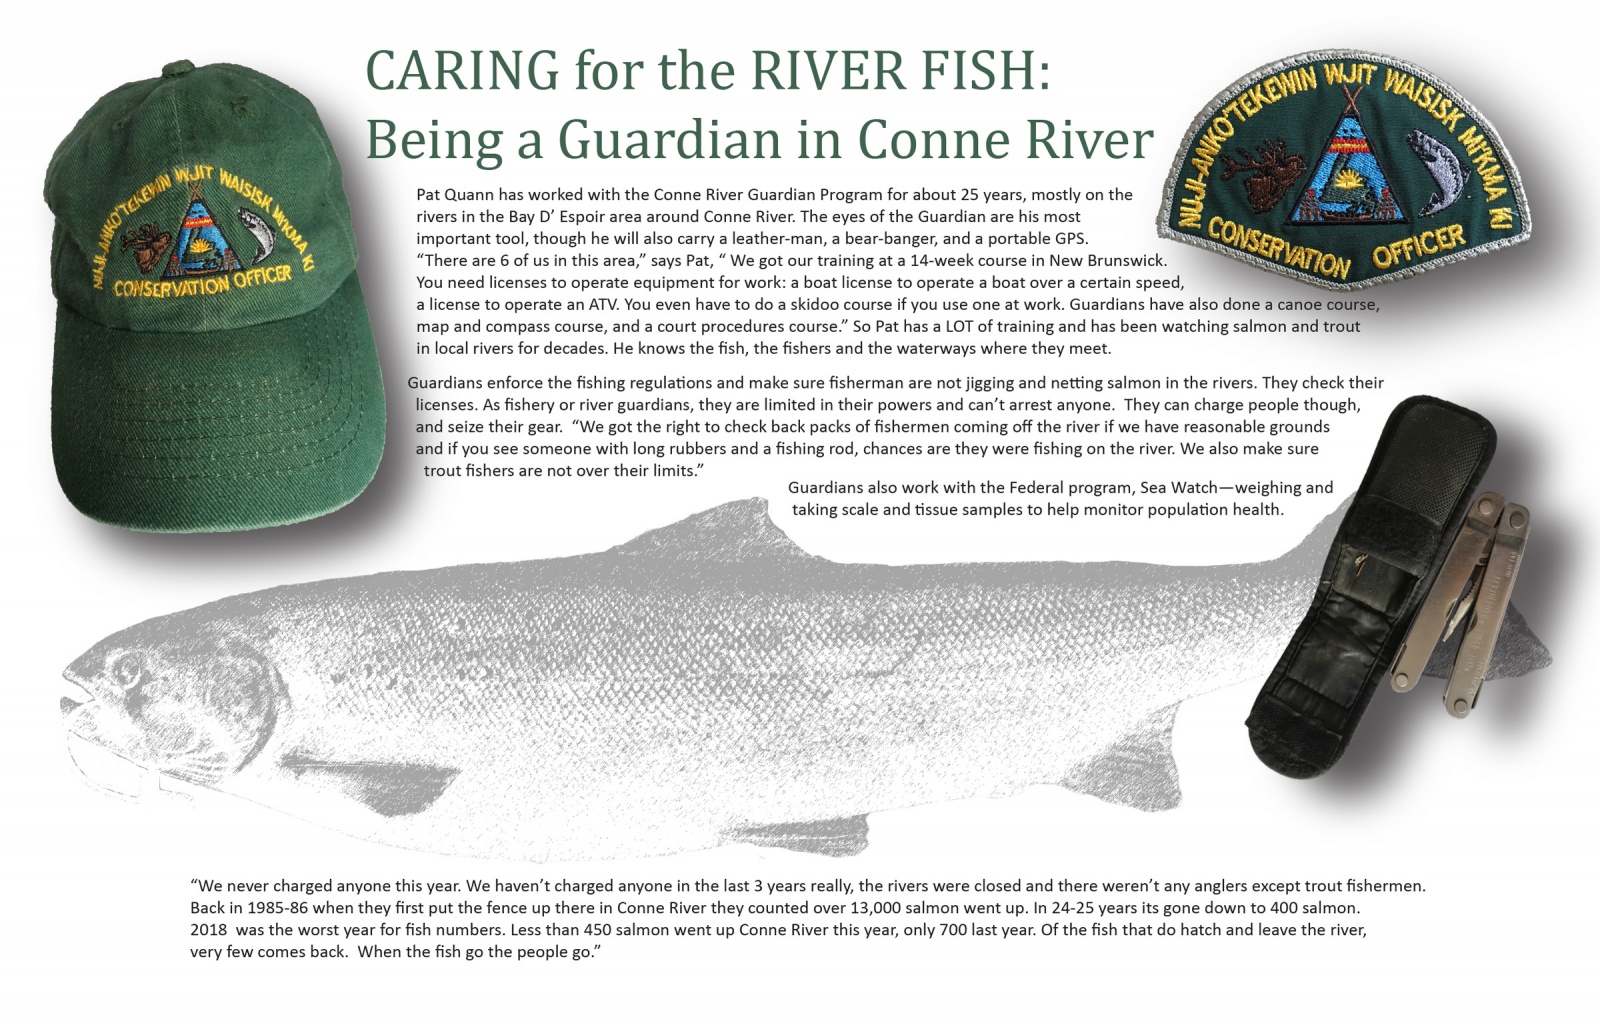 Caring for the River Fish: Being a Guardian in Conne River